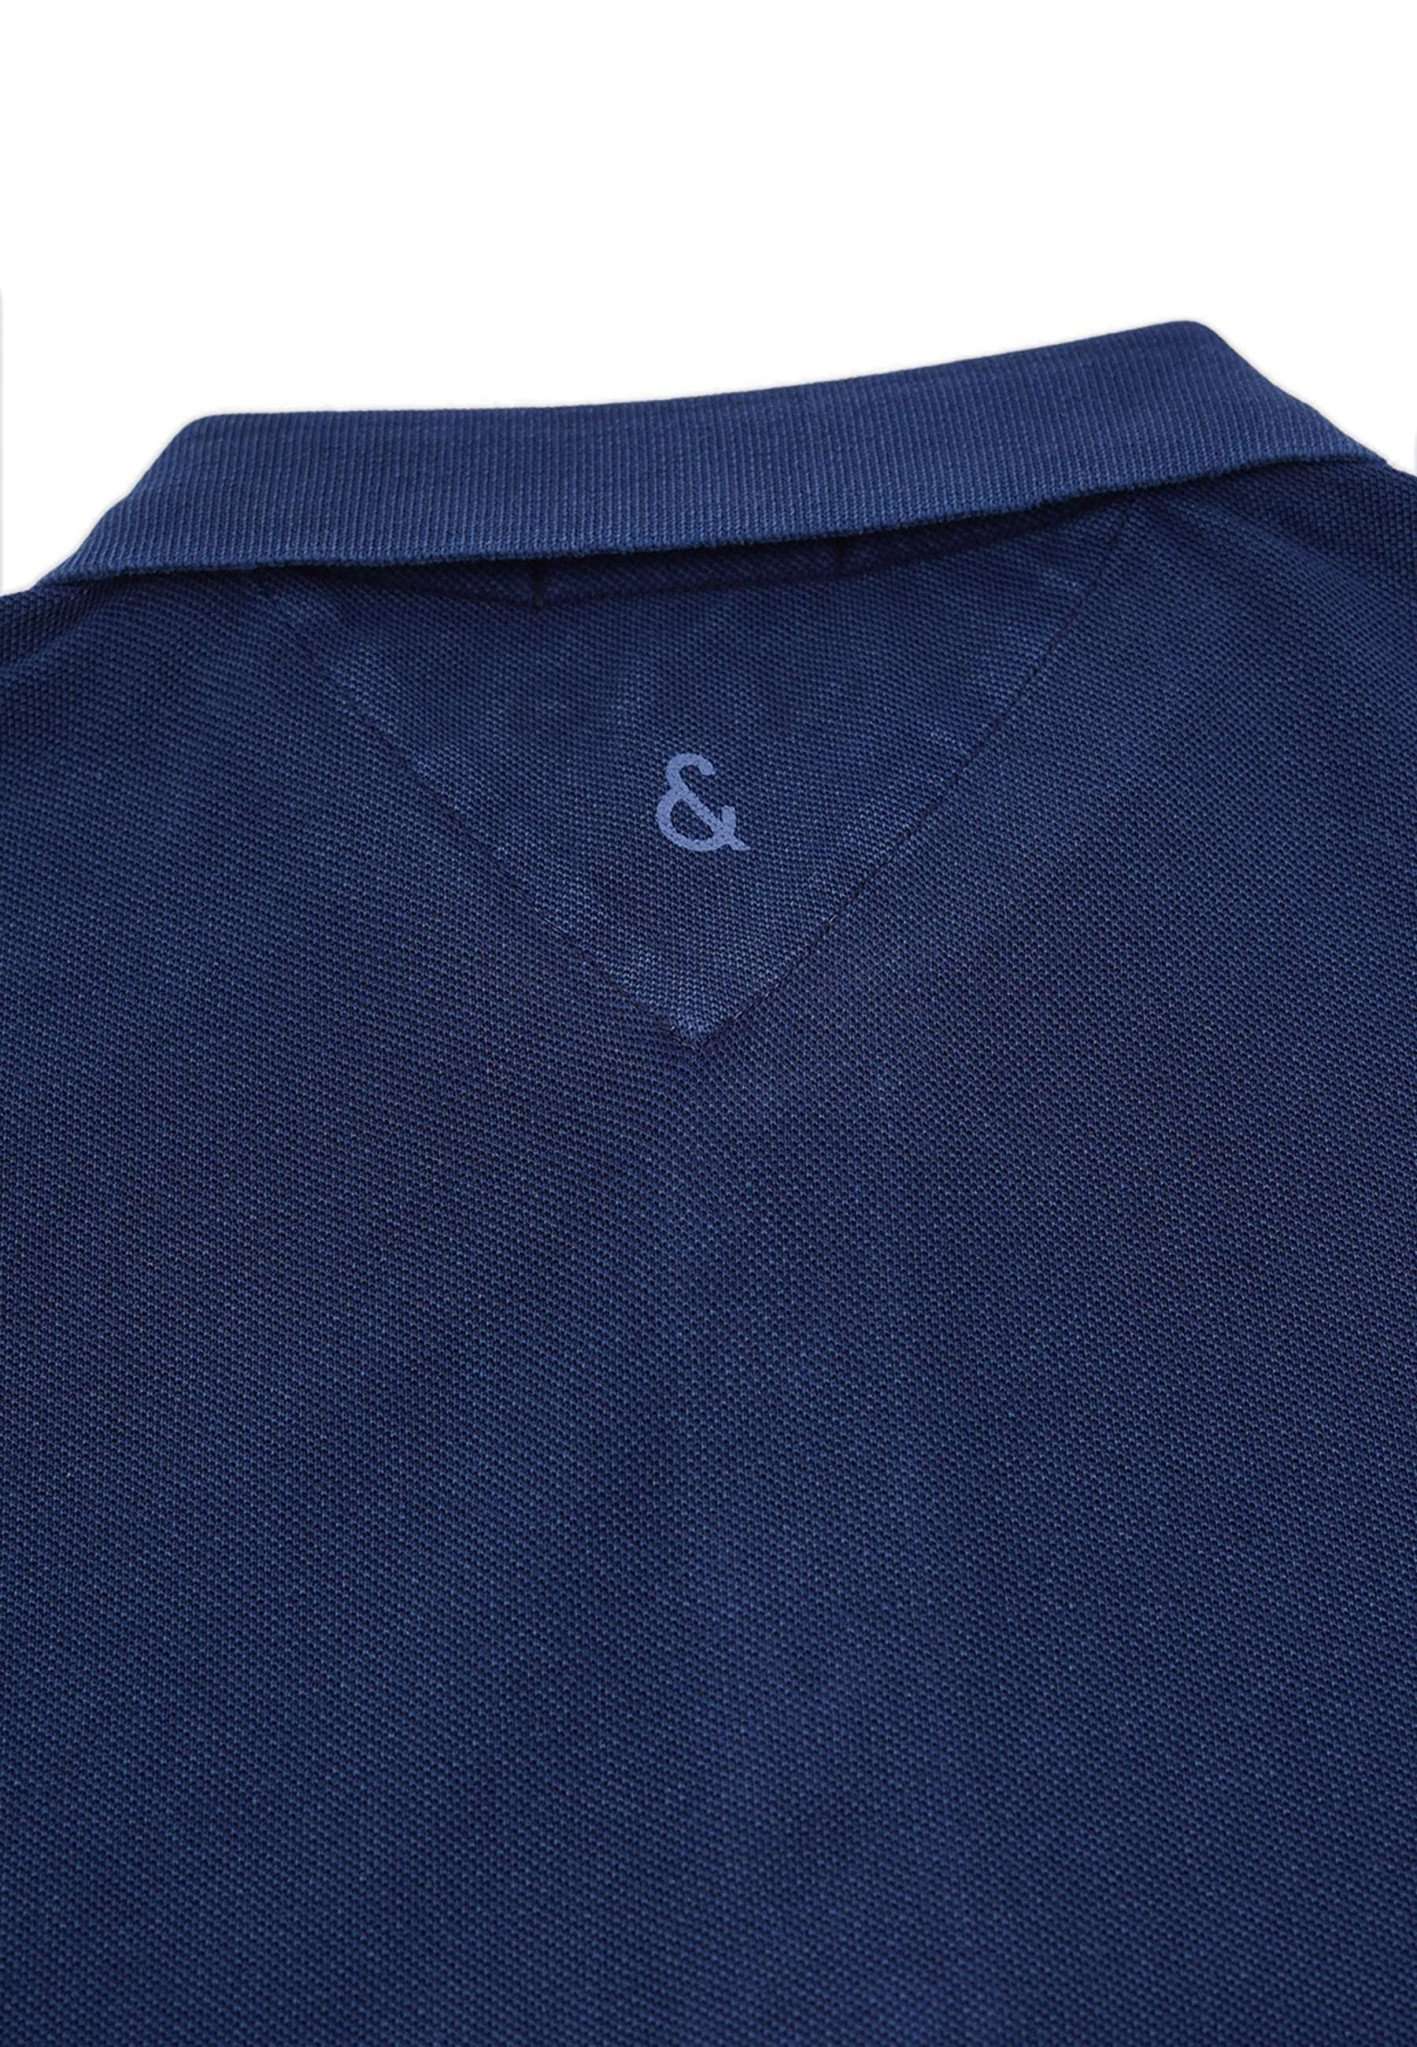 Polo Washed in Navy Polos Colours and Sons   